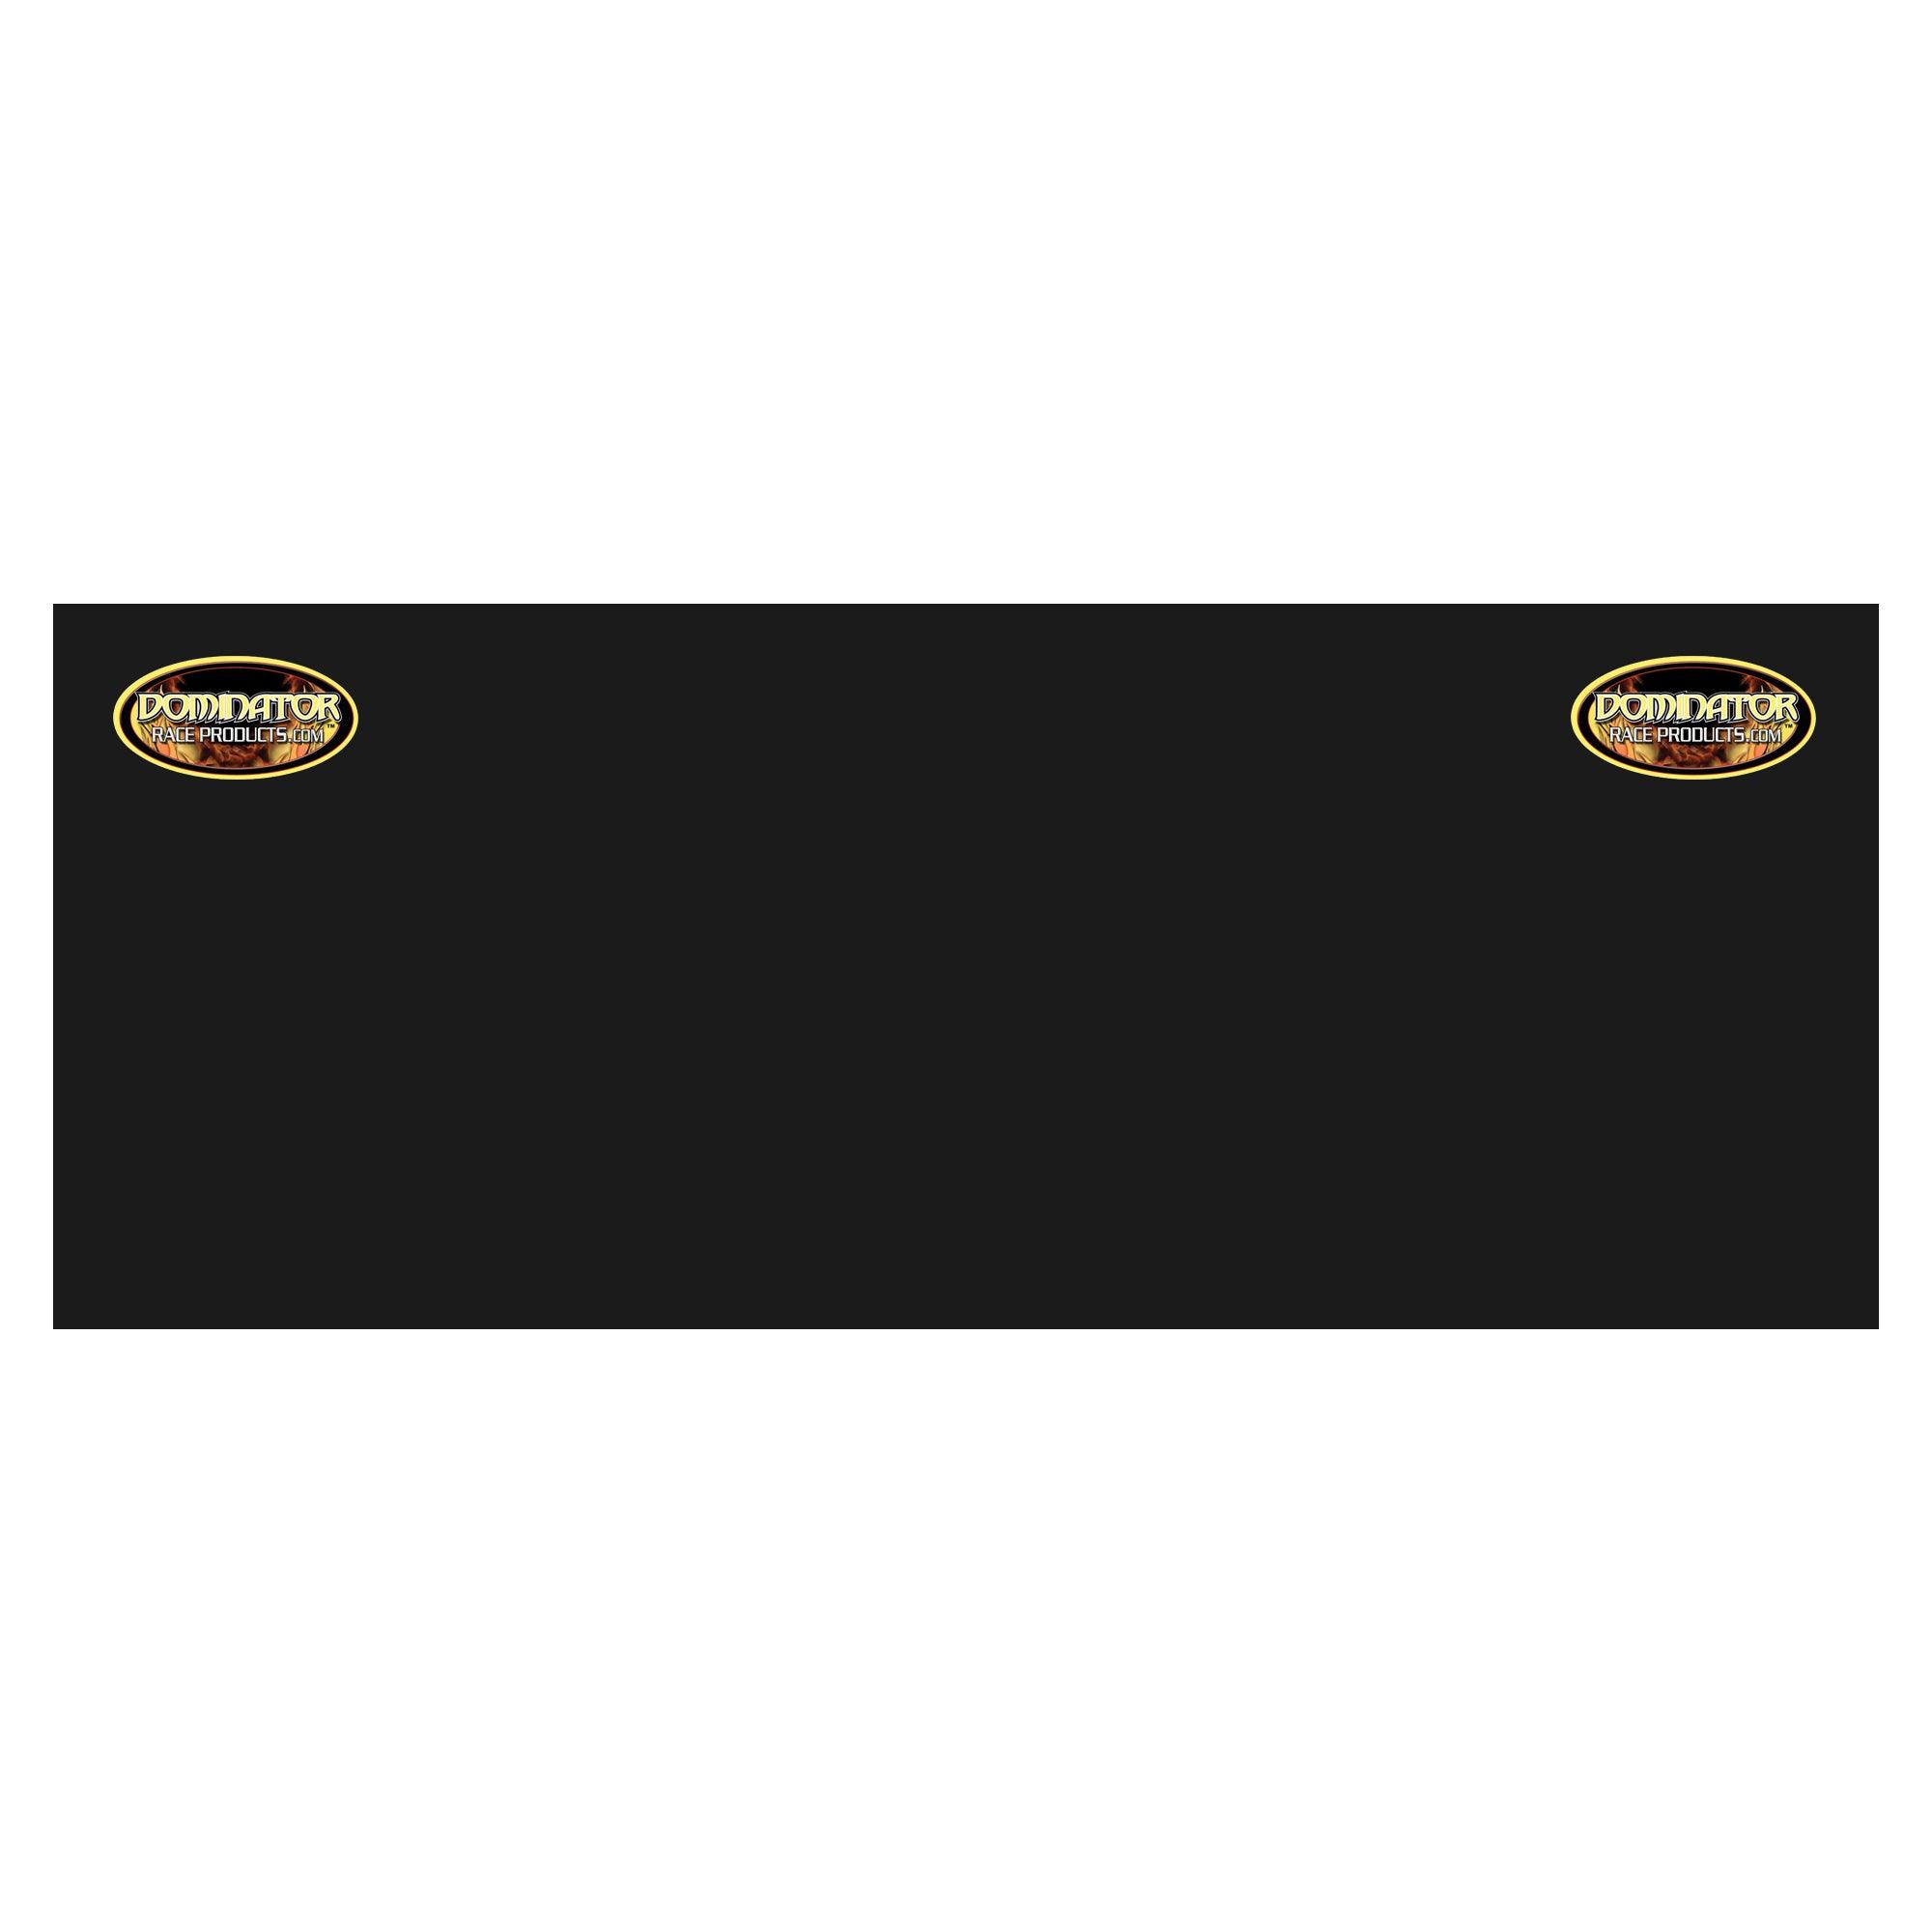 Quarter Panel Mod Black 30in x 70in - Burlile Performance Products